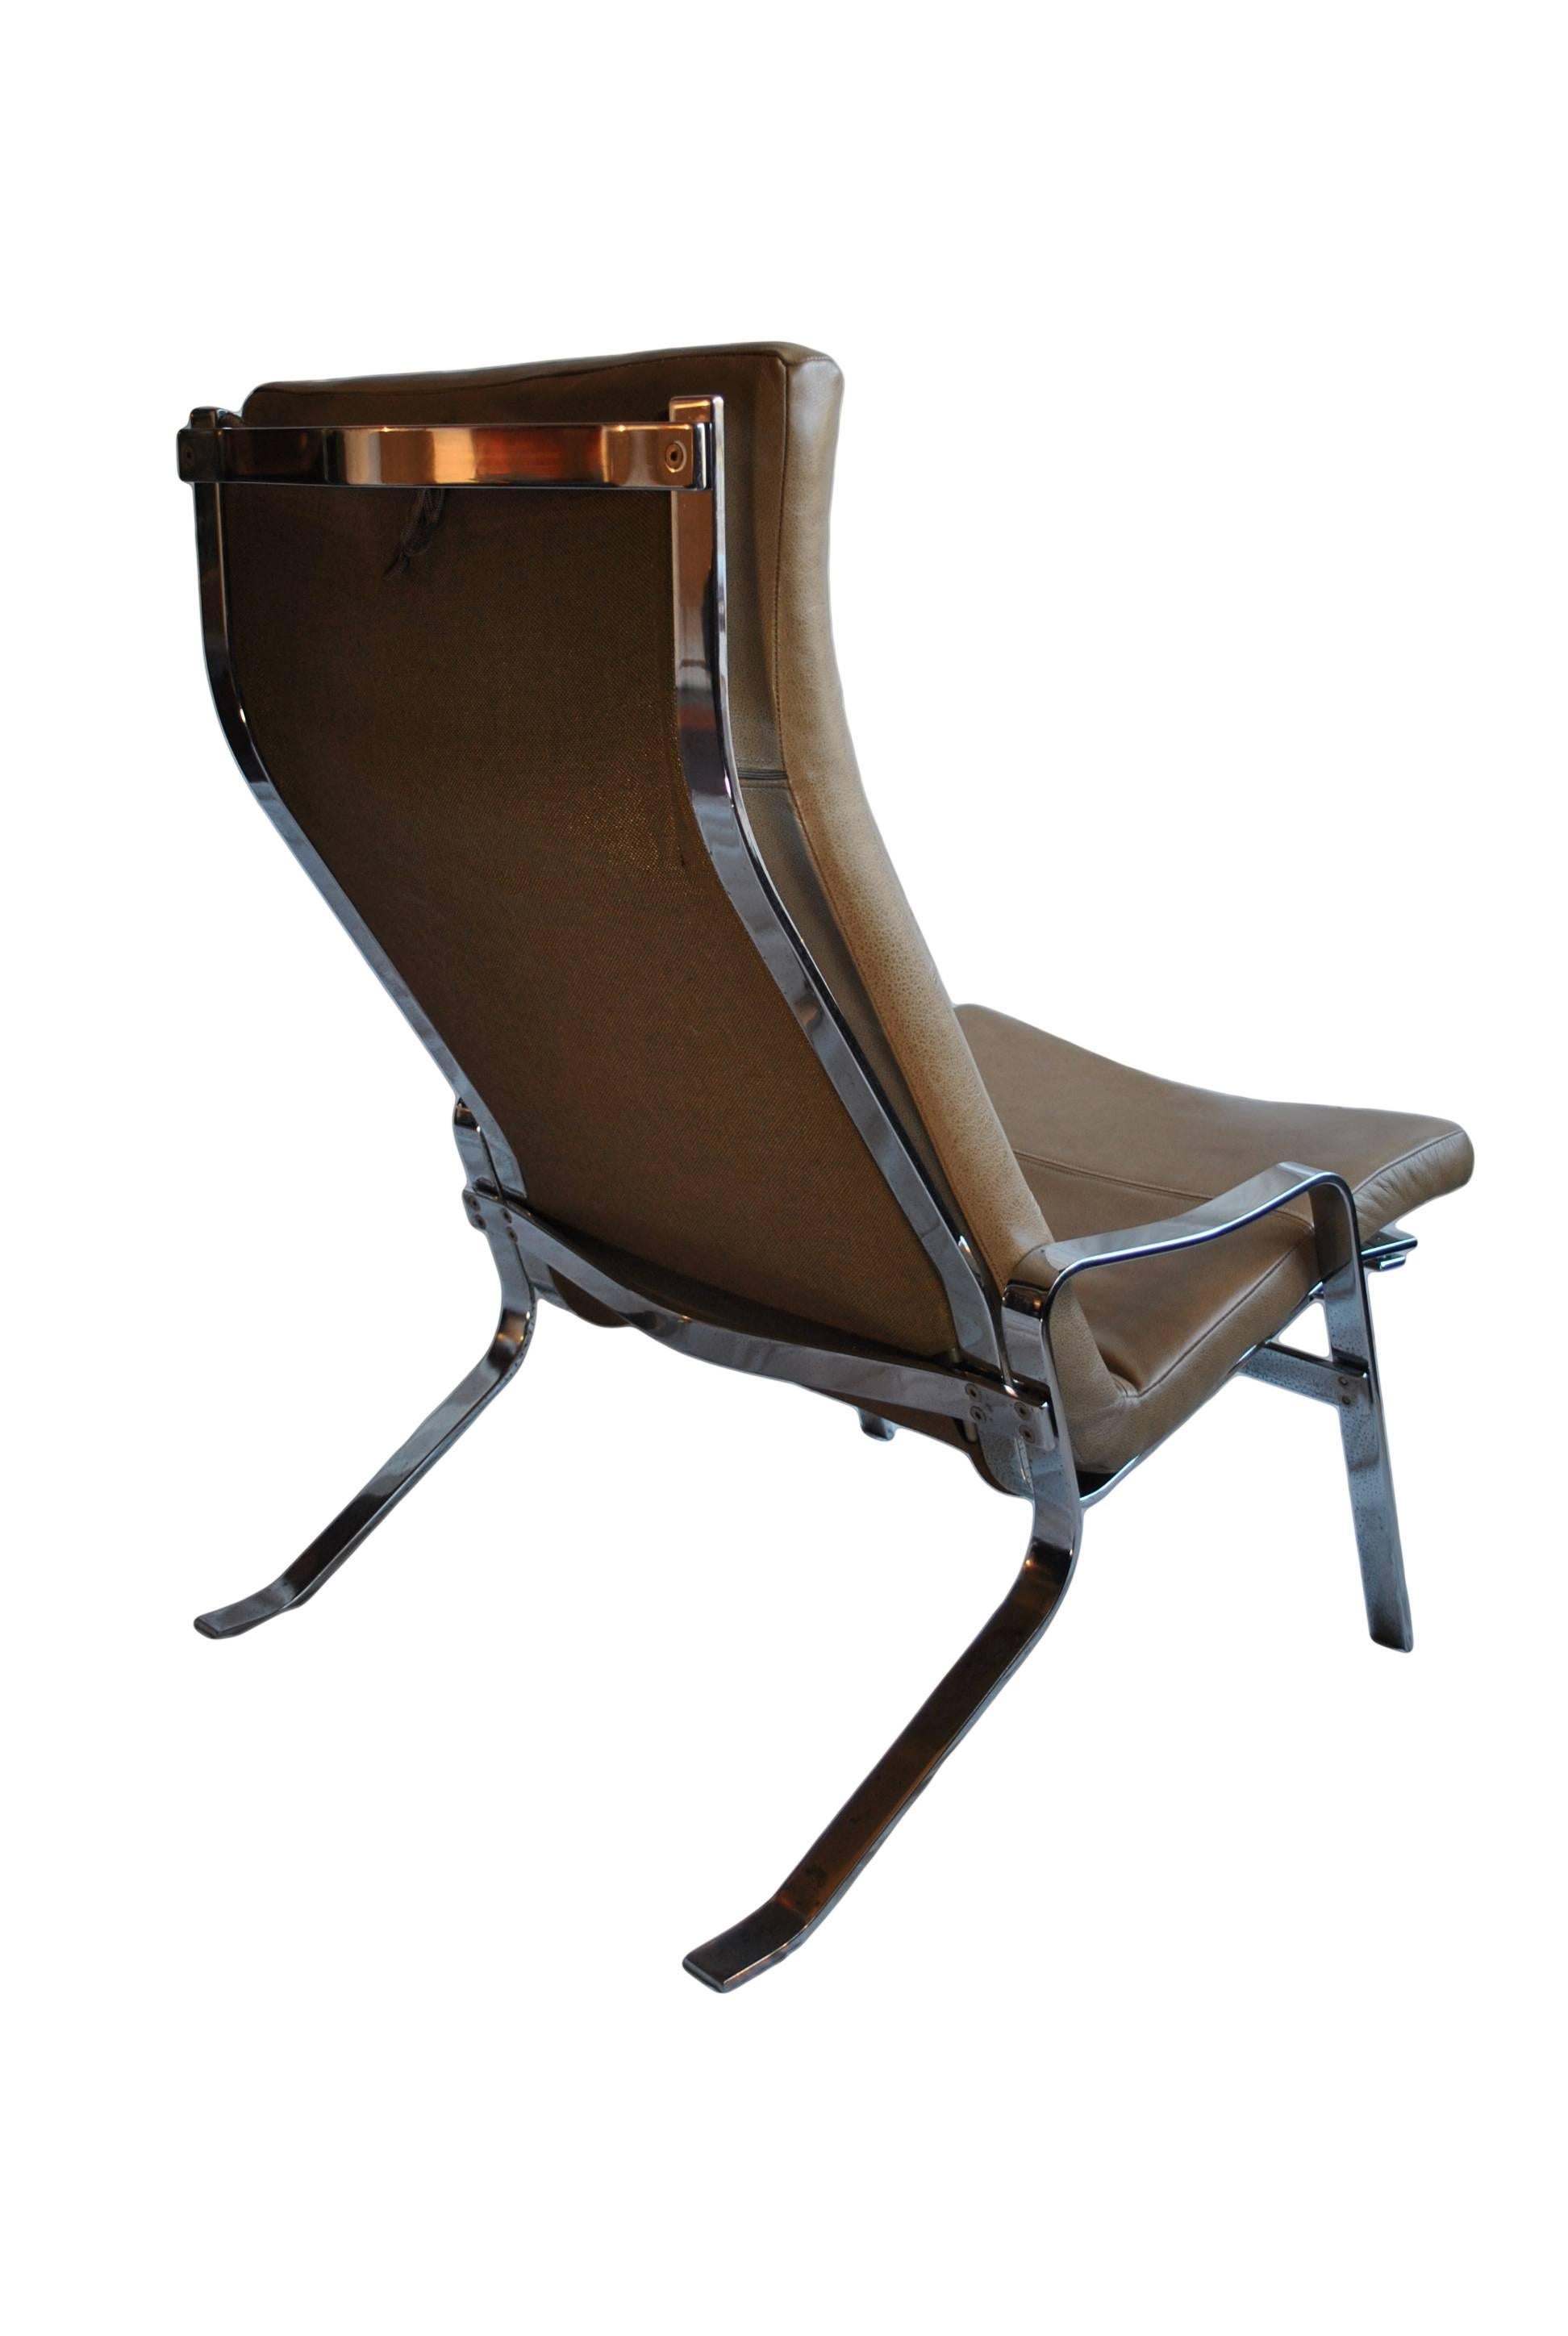 Swedish Arne Norell Style Midcentury Lounge Chair